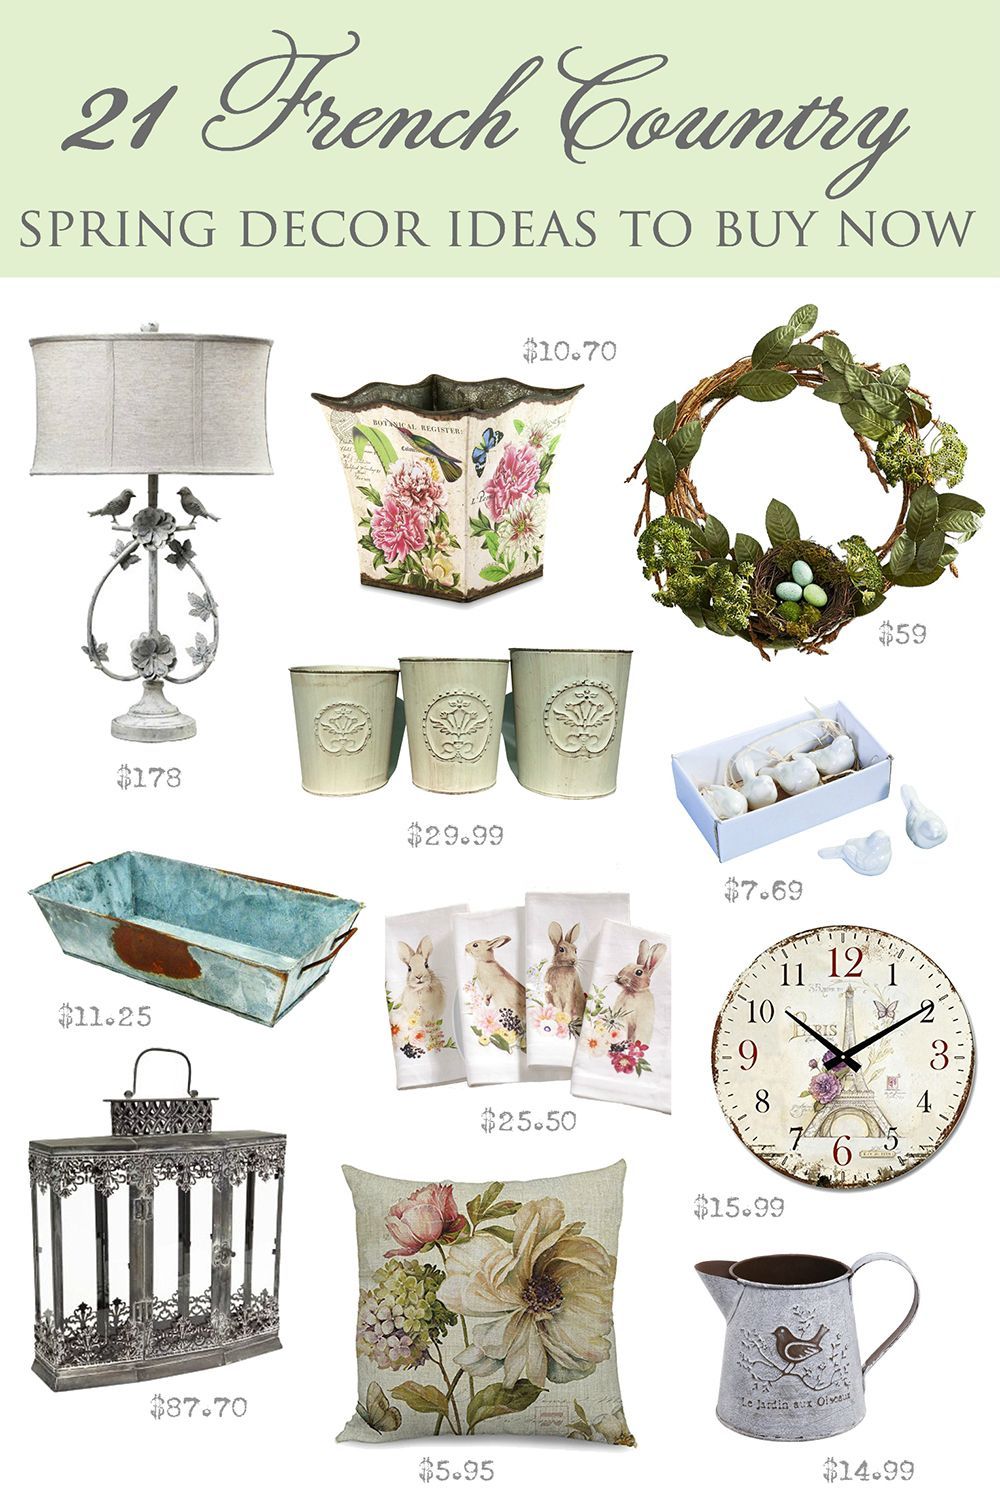 33 French Country Spring Decor Ideas to Buy Now -   22 french decor accessories
 ideas